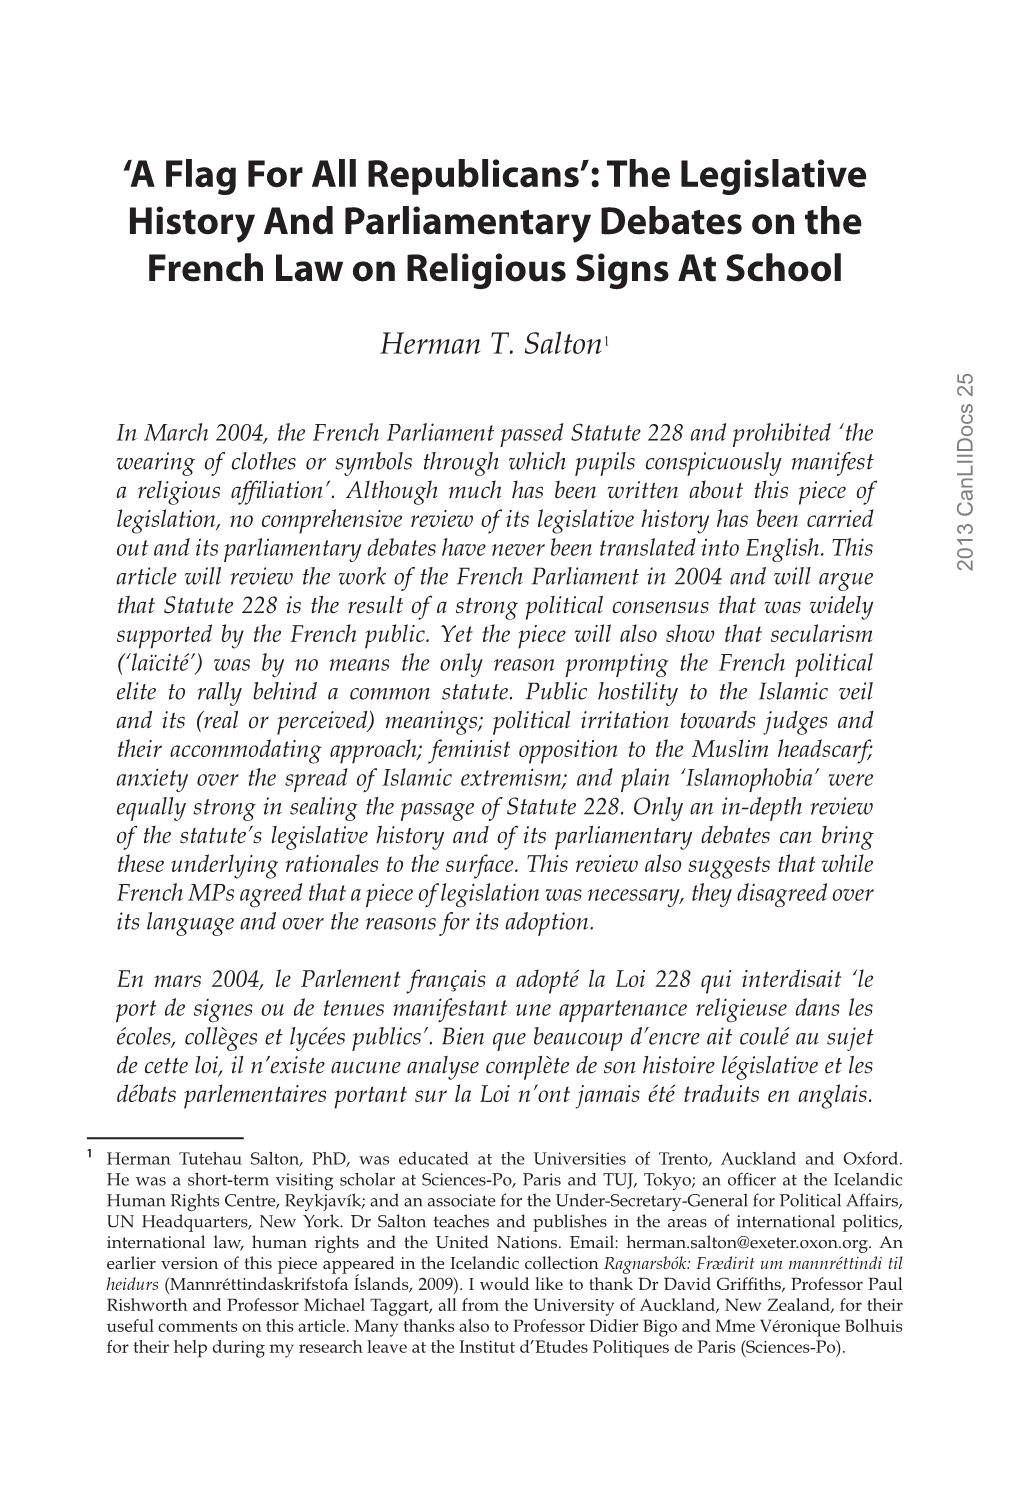 The Legislative History and Parliamentary Debates on the French Law on Religious Signs at School